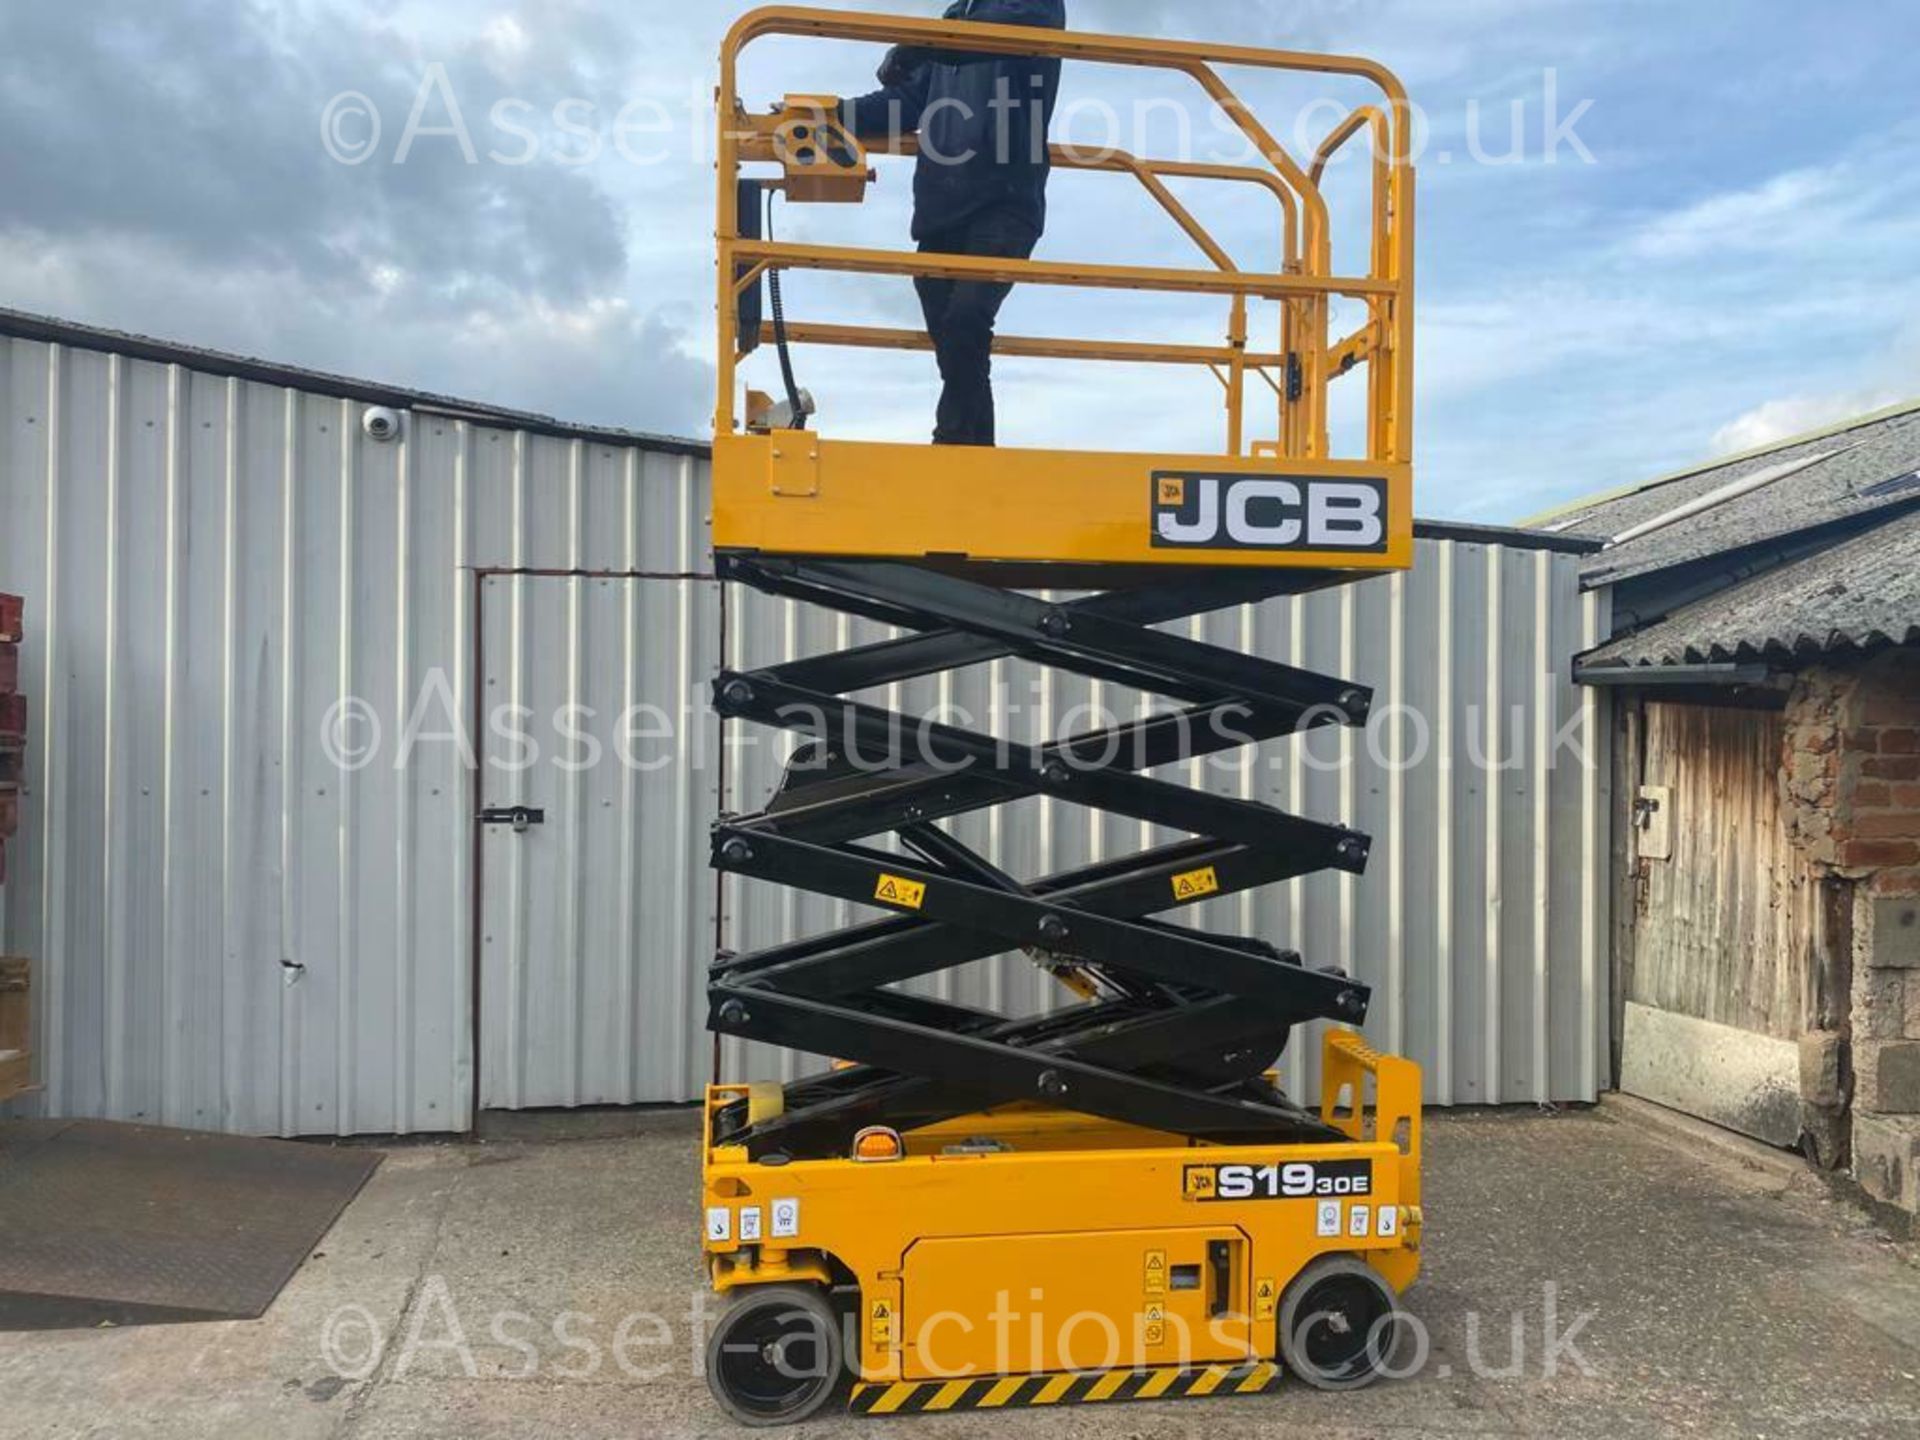 SCISSOR LIFT JCB S1930E ELECTRIC, PLATFORM HEIGHT 5.8m/ 19ft, ONLY 98.4 HOURS, YEAR 2018 *PLUS VAT* - Image 7 of 14